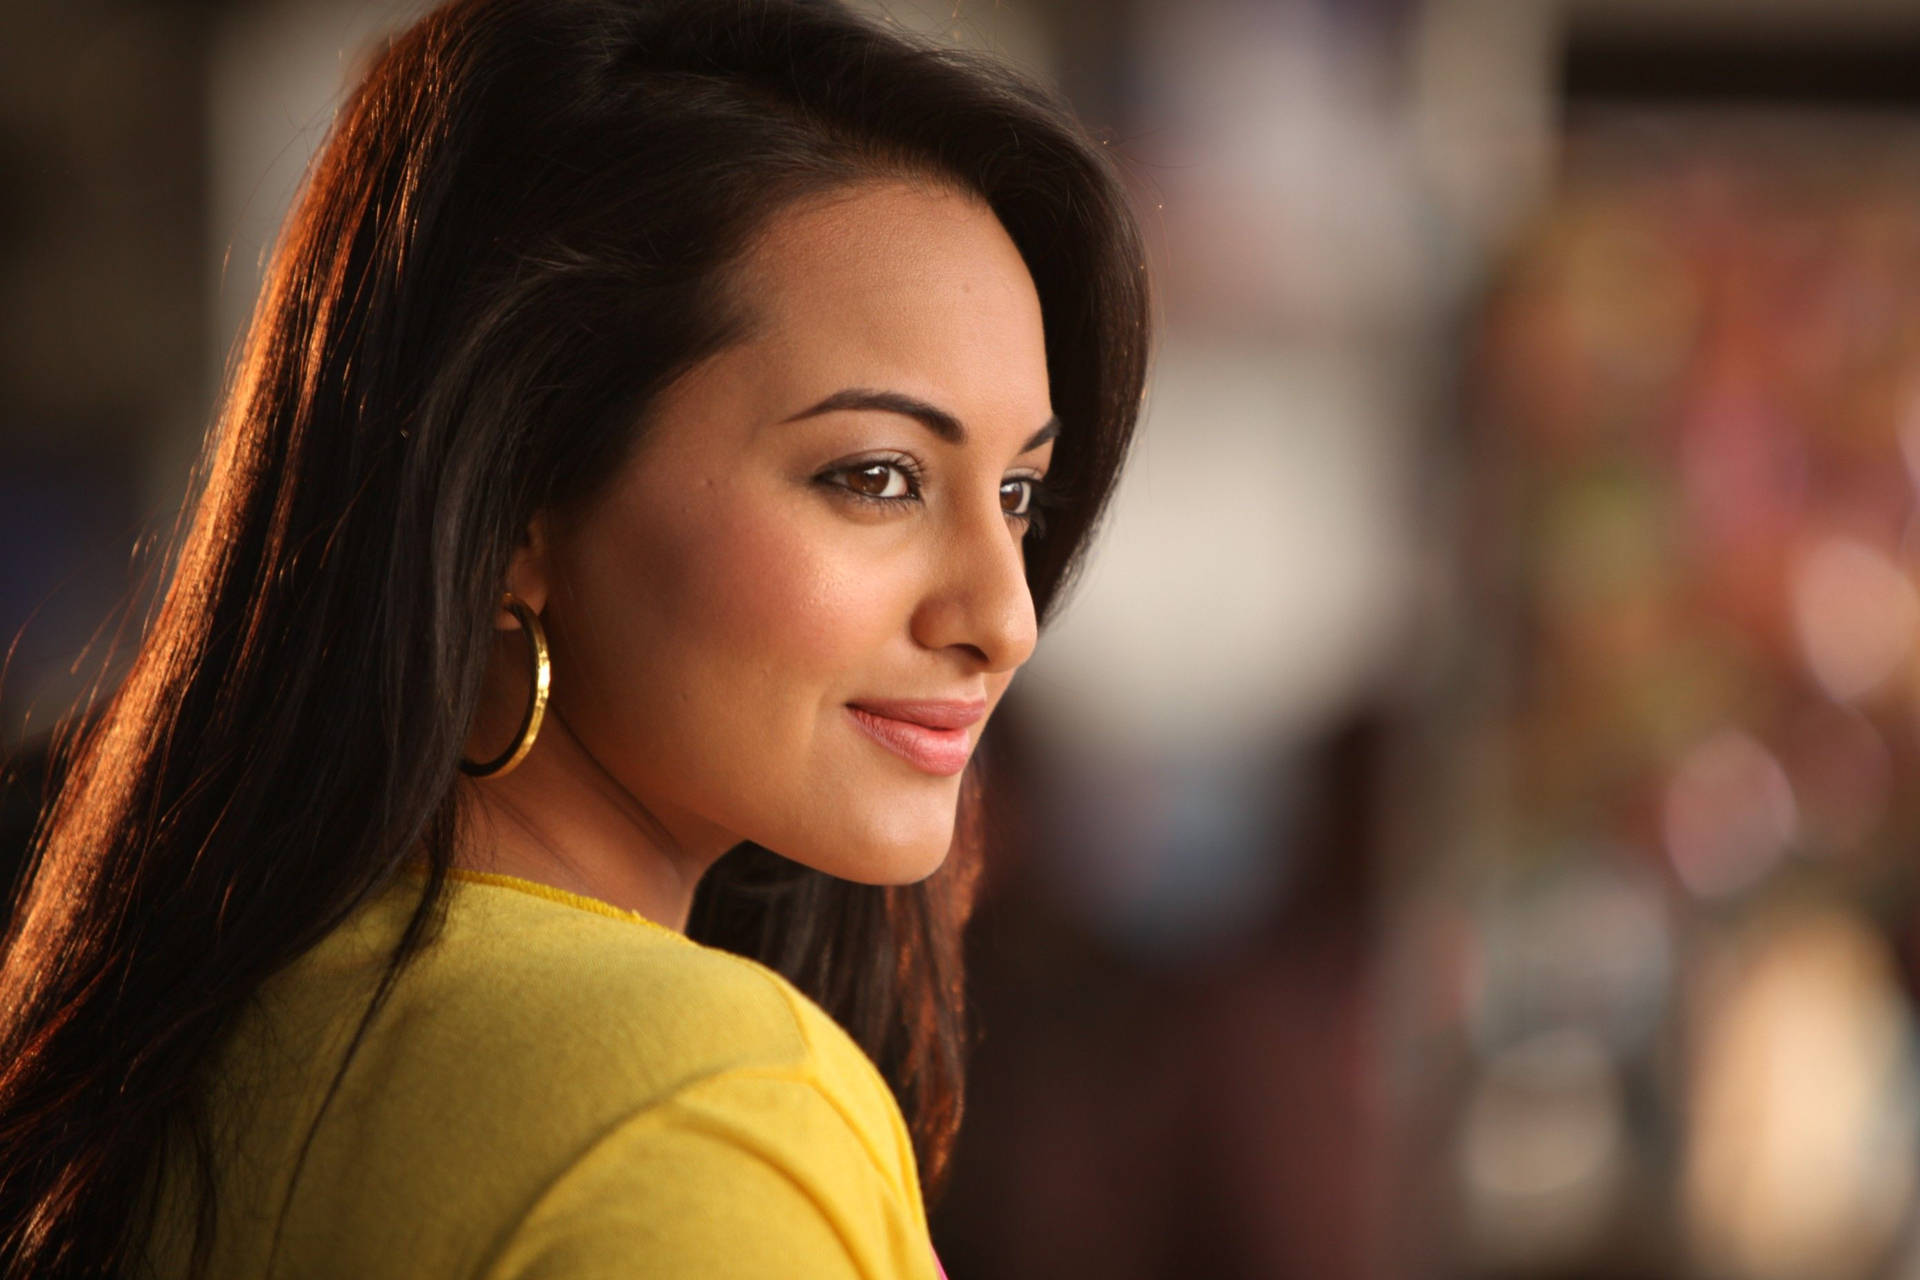 Sonakshi Sinha Hot Sexy Dance Mp4 Video Downlod - Free Sonakshi Wallpaper Downloads, [38+] Sonakshi Wallpapers for FREE |  Wallpapers.com